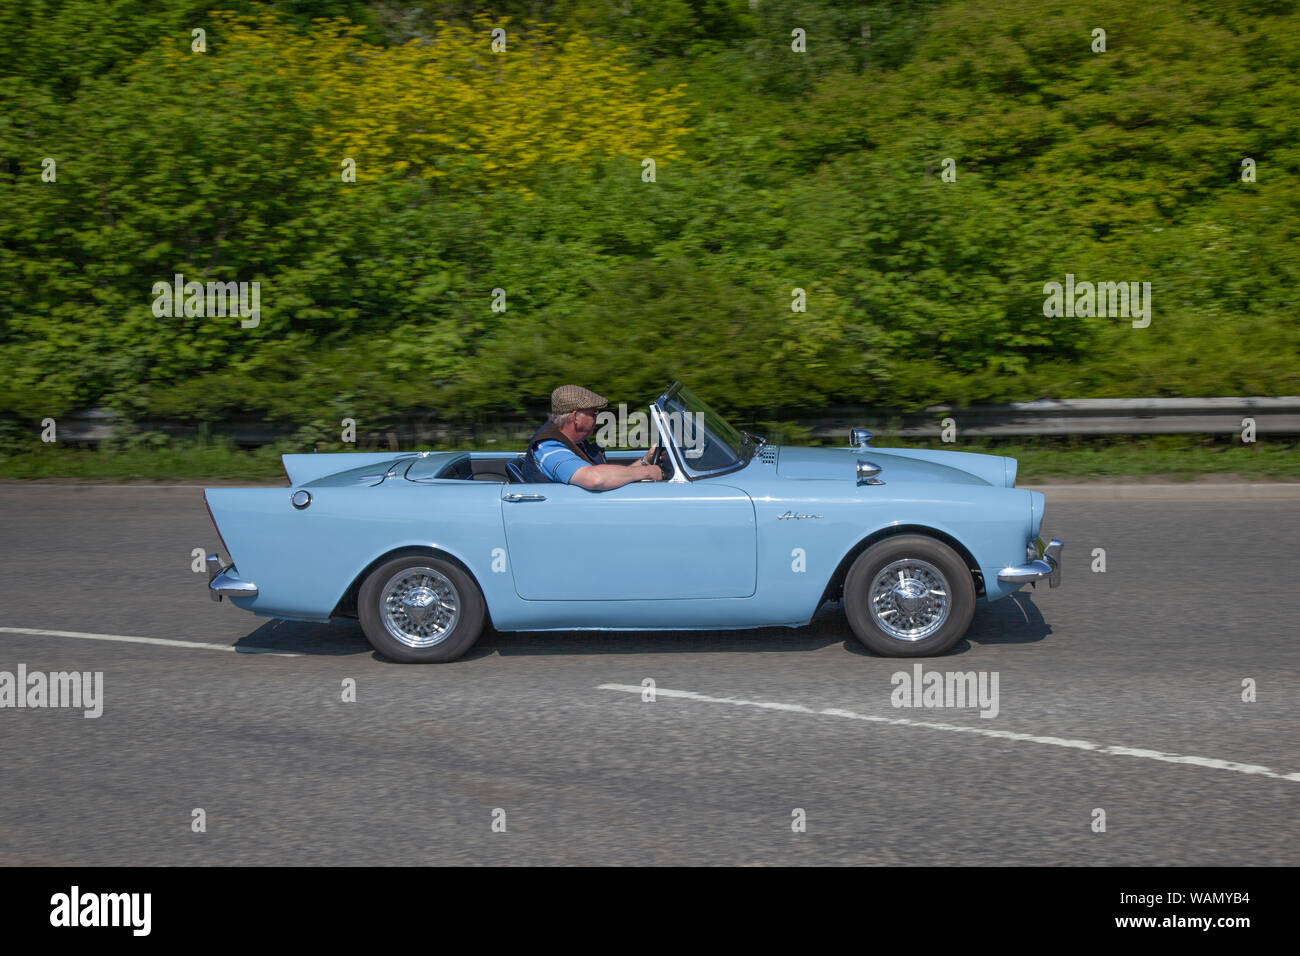 1963 60s sixties blue Sunbeam Alpine, two-seater sports roadster/drophead coupé. British classic cars, veteran and heritage, cherished oldtimers at the Pendle vintage car show, UK Stock Photo